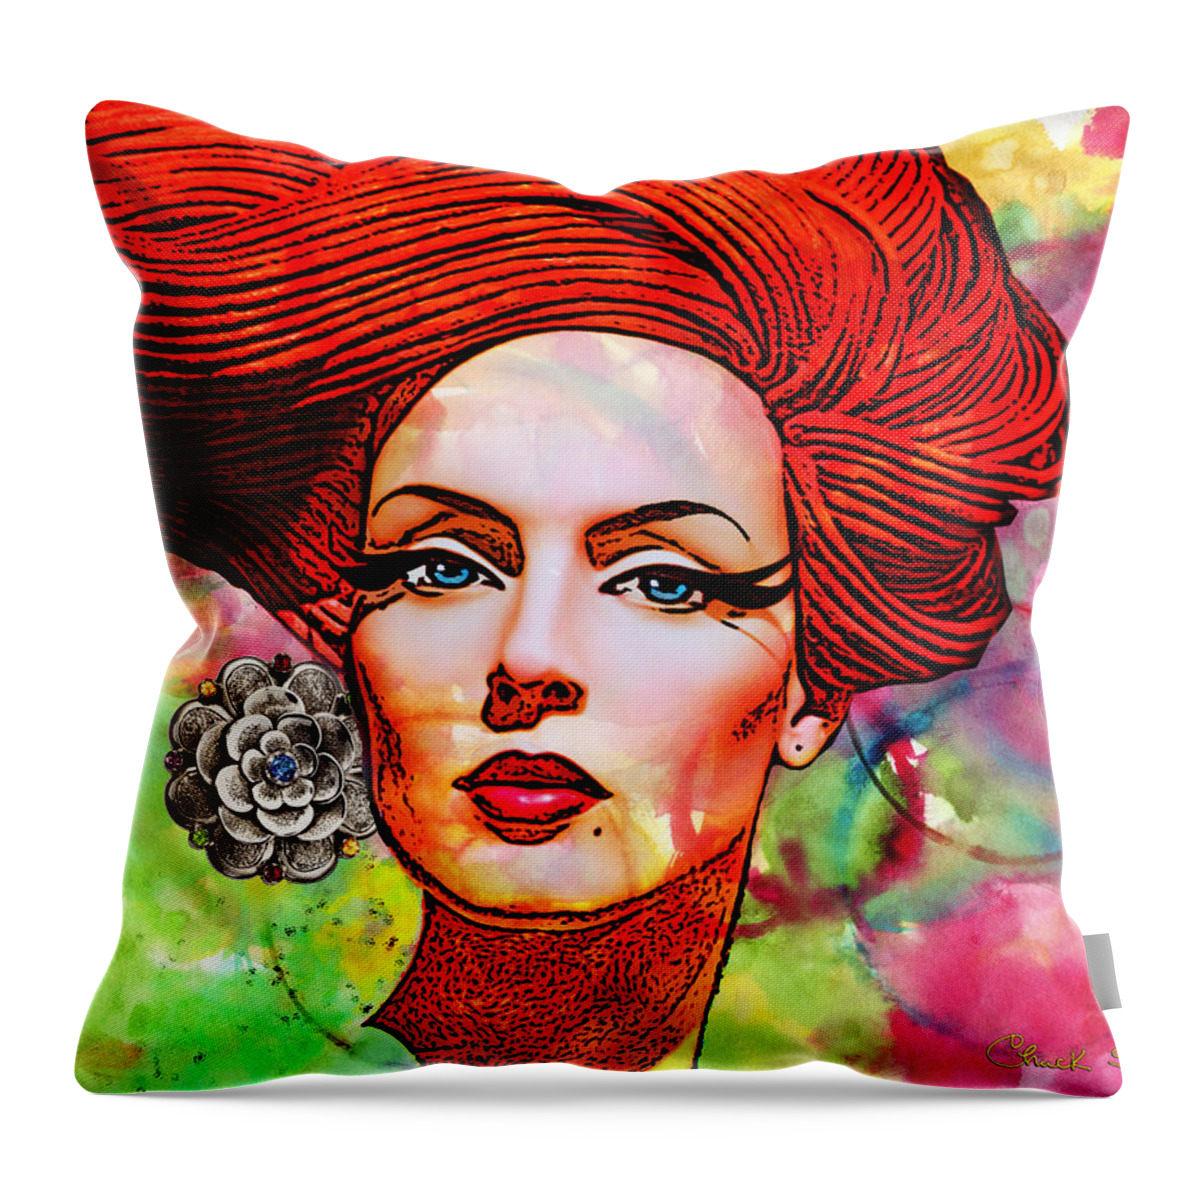 Redhead Throw Pillow featuring the mixed media Woman With Earring by Chuck Staley